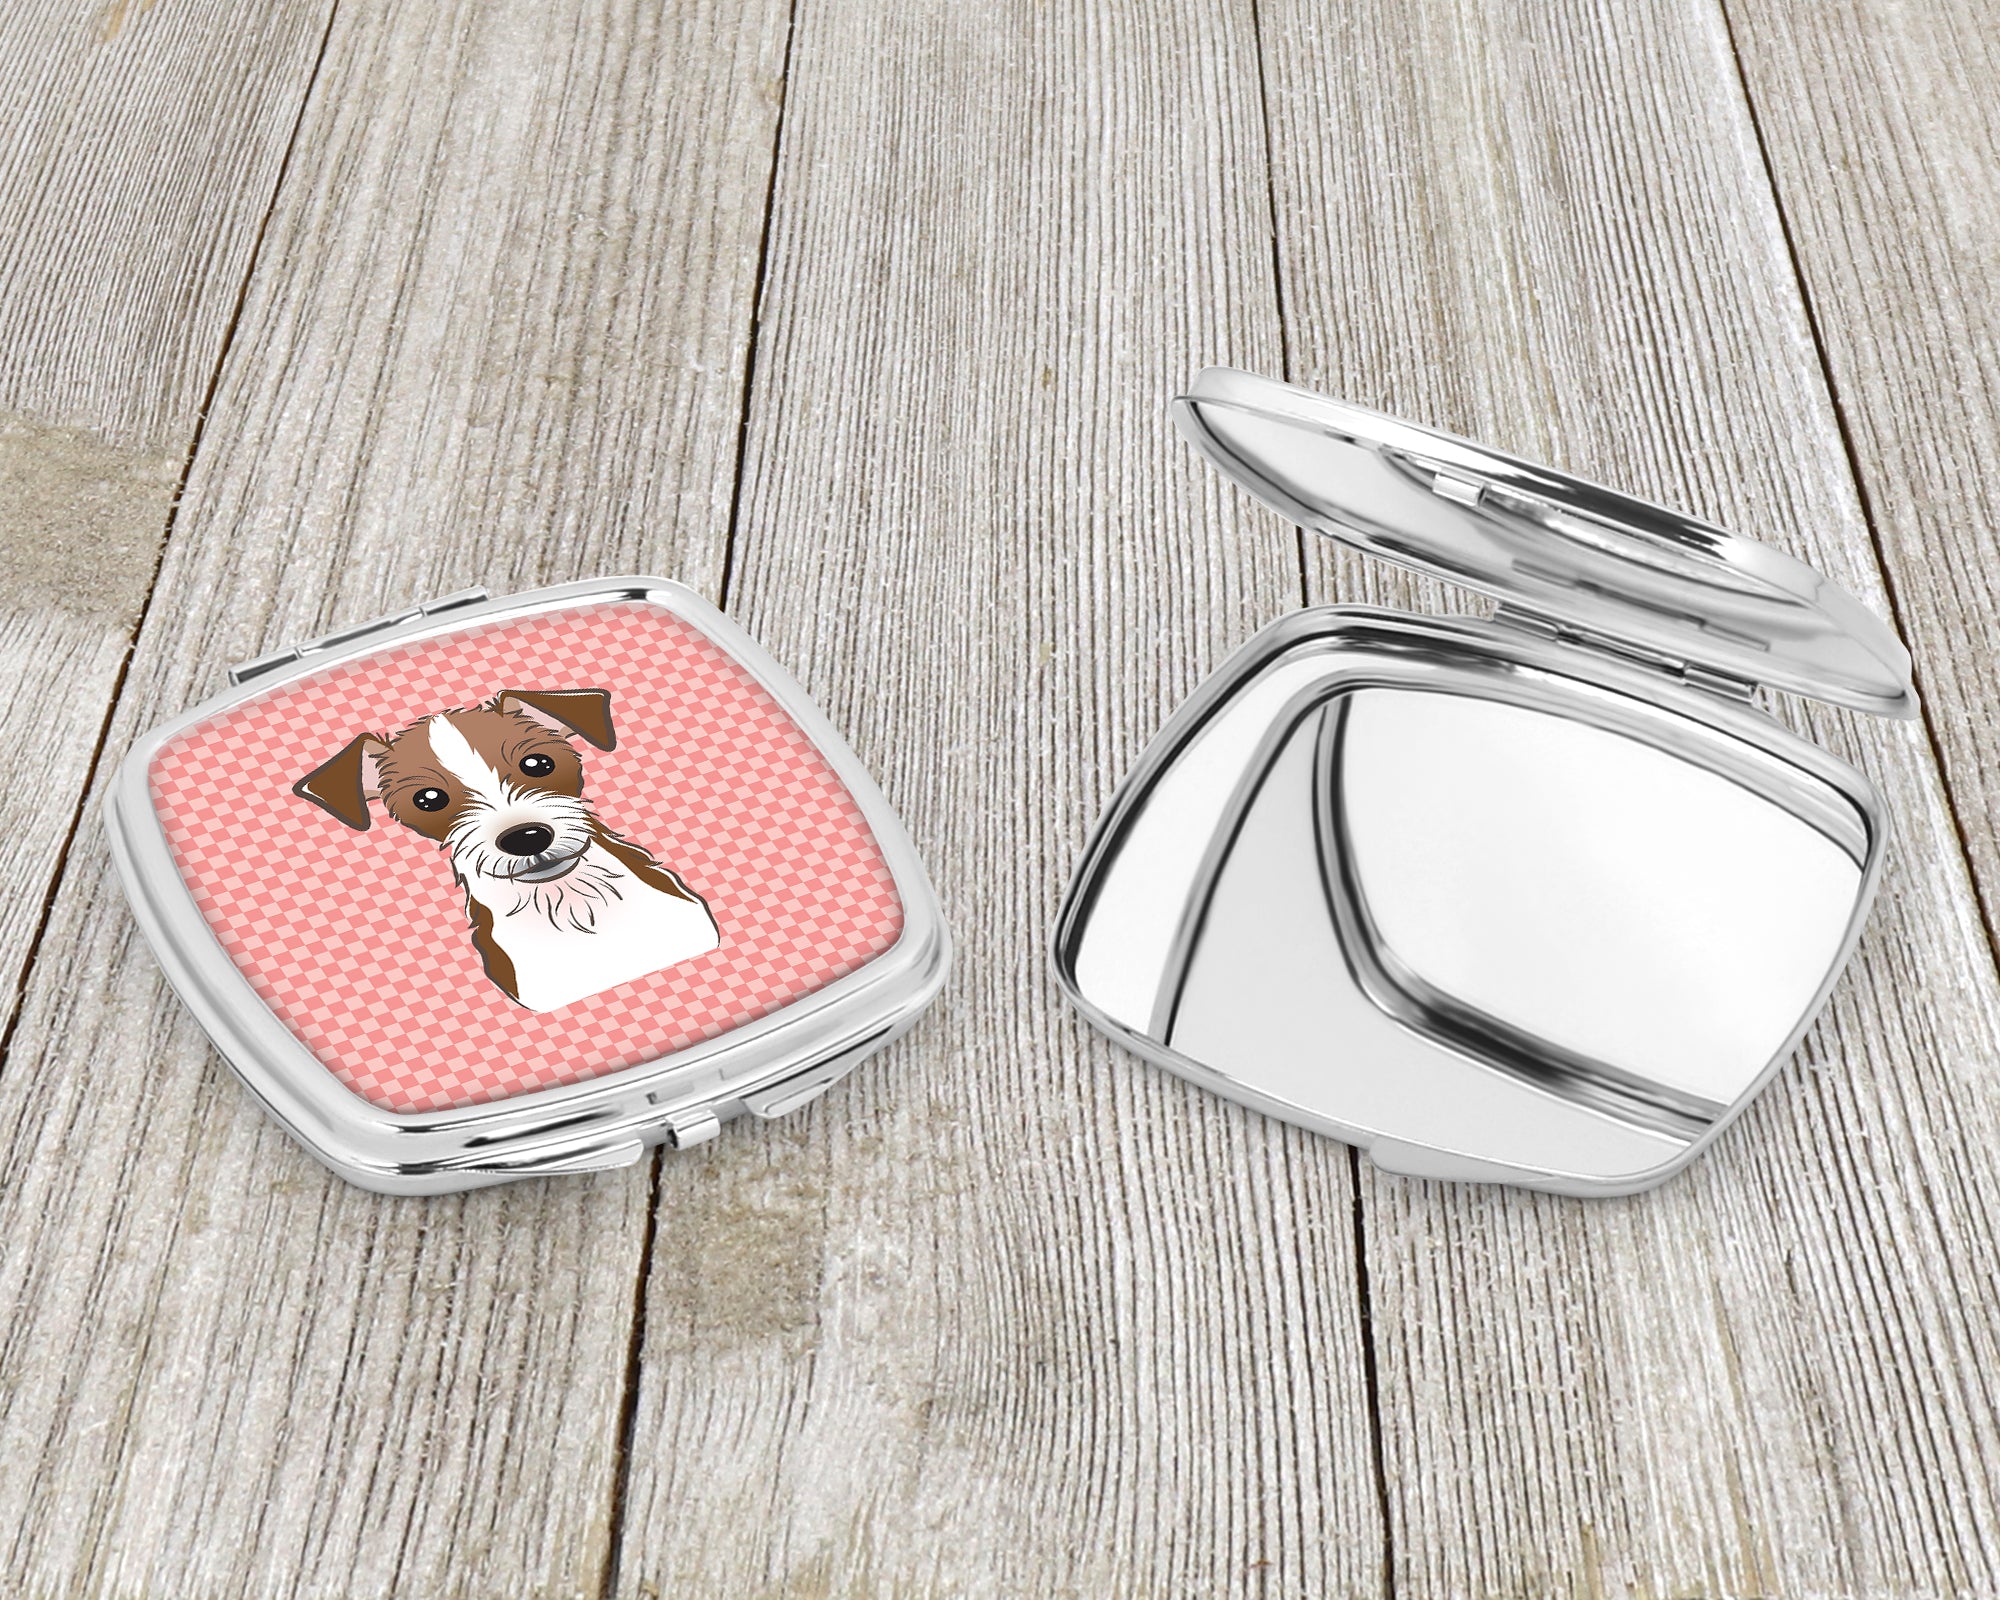 Checkerboard Pink Jack Russell Terrier Compact Mirror BB1202SCM  the-store.com.